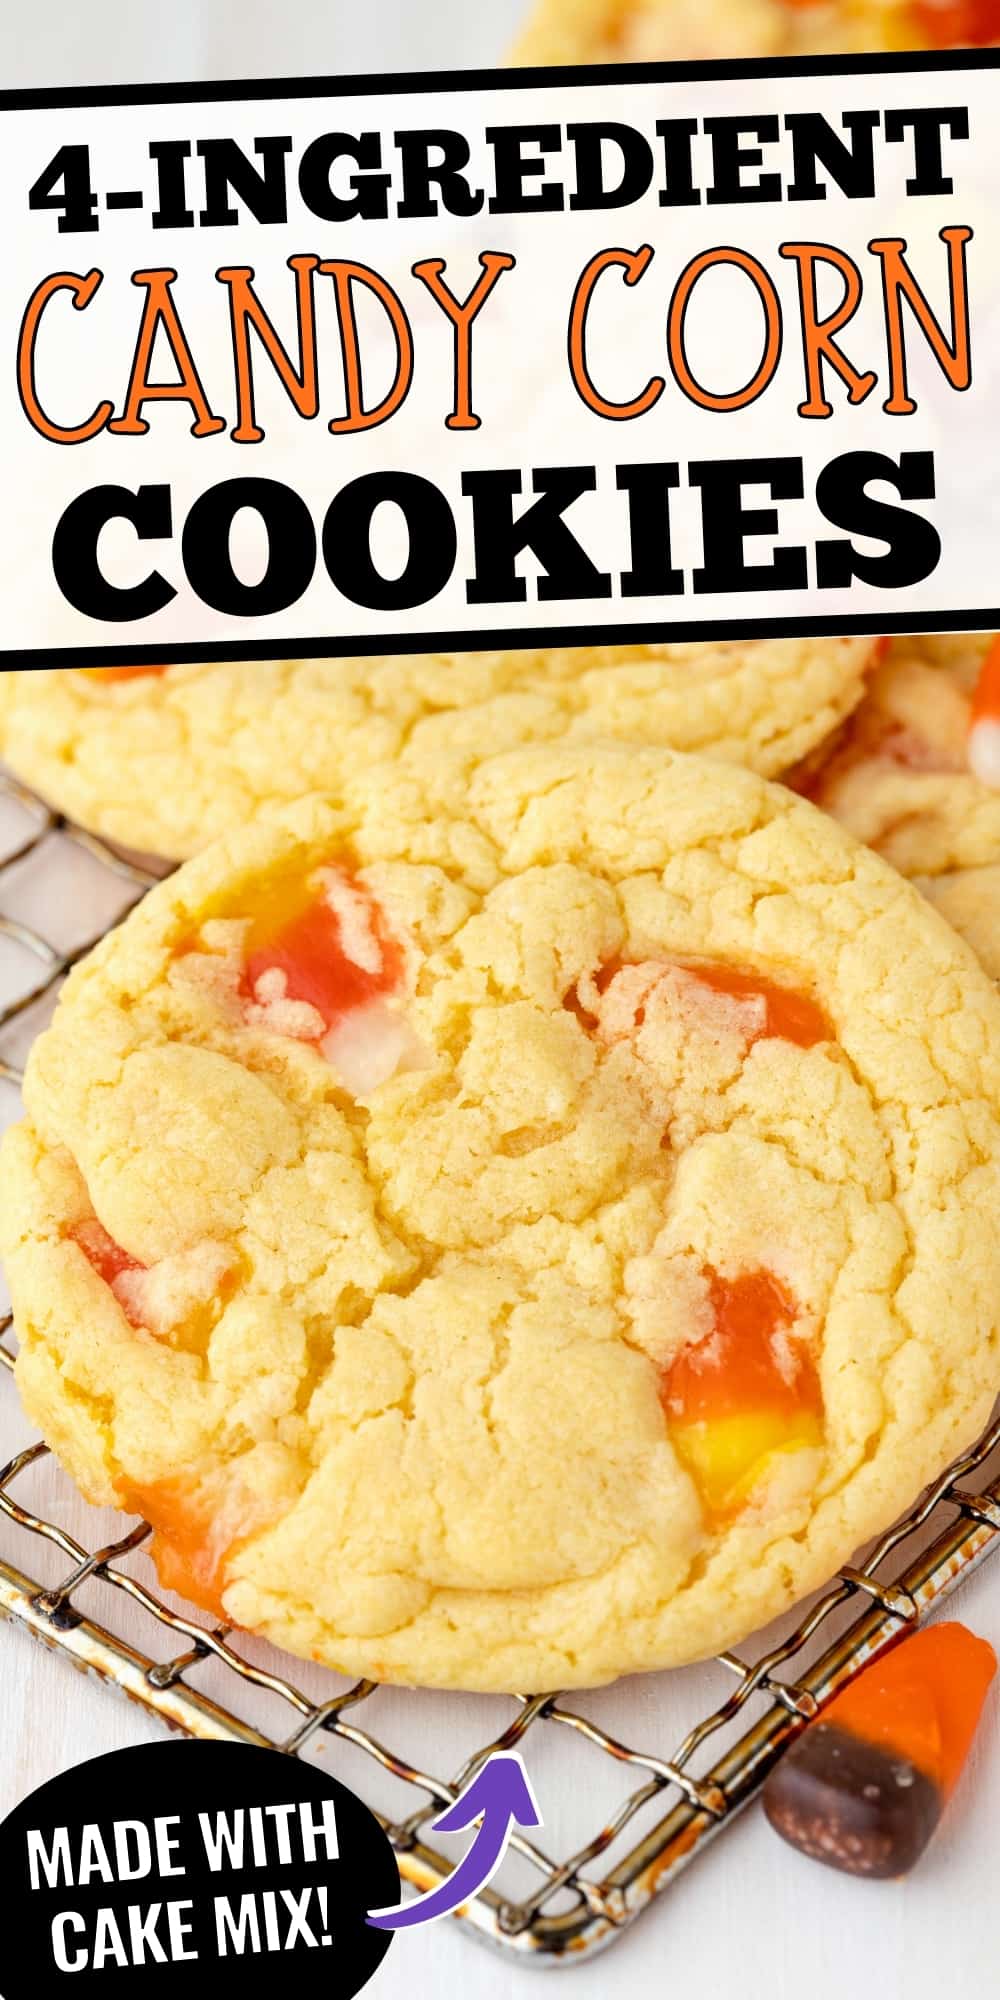 $-Ingredient Candy Corn Cookies made with Cake Mix